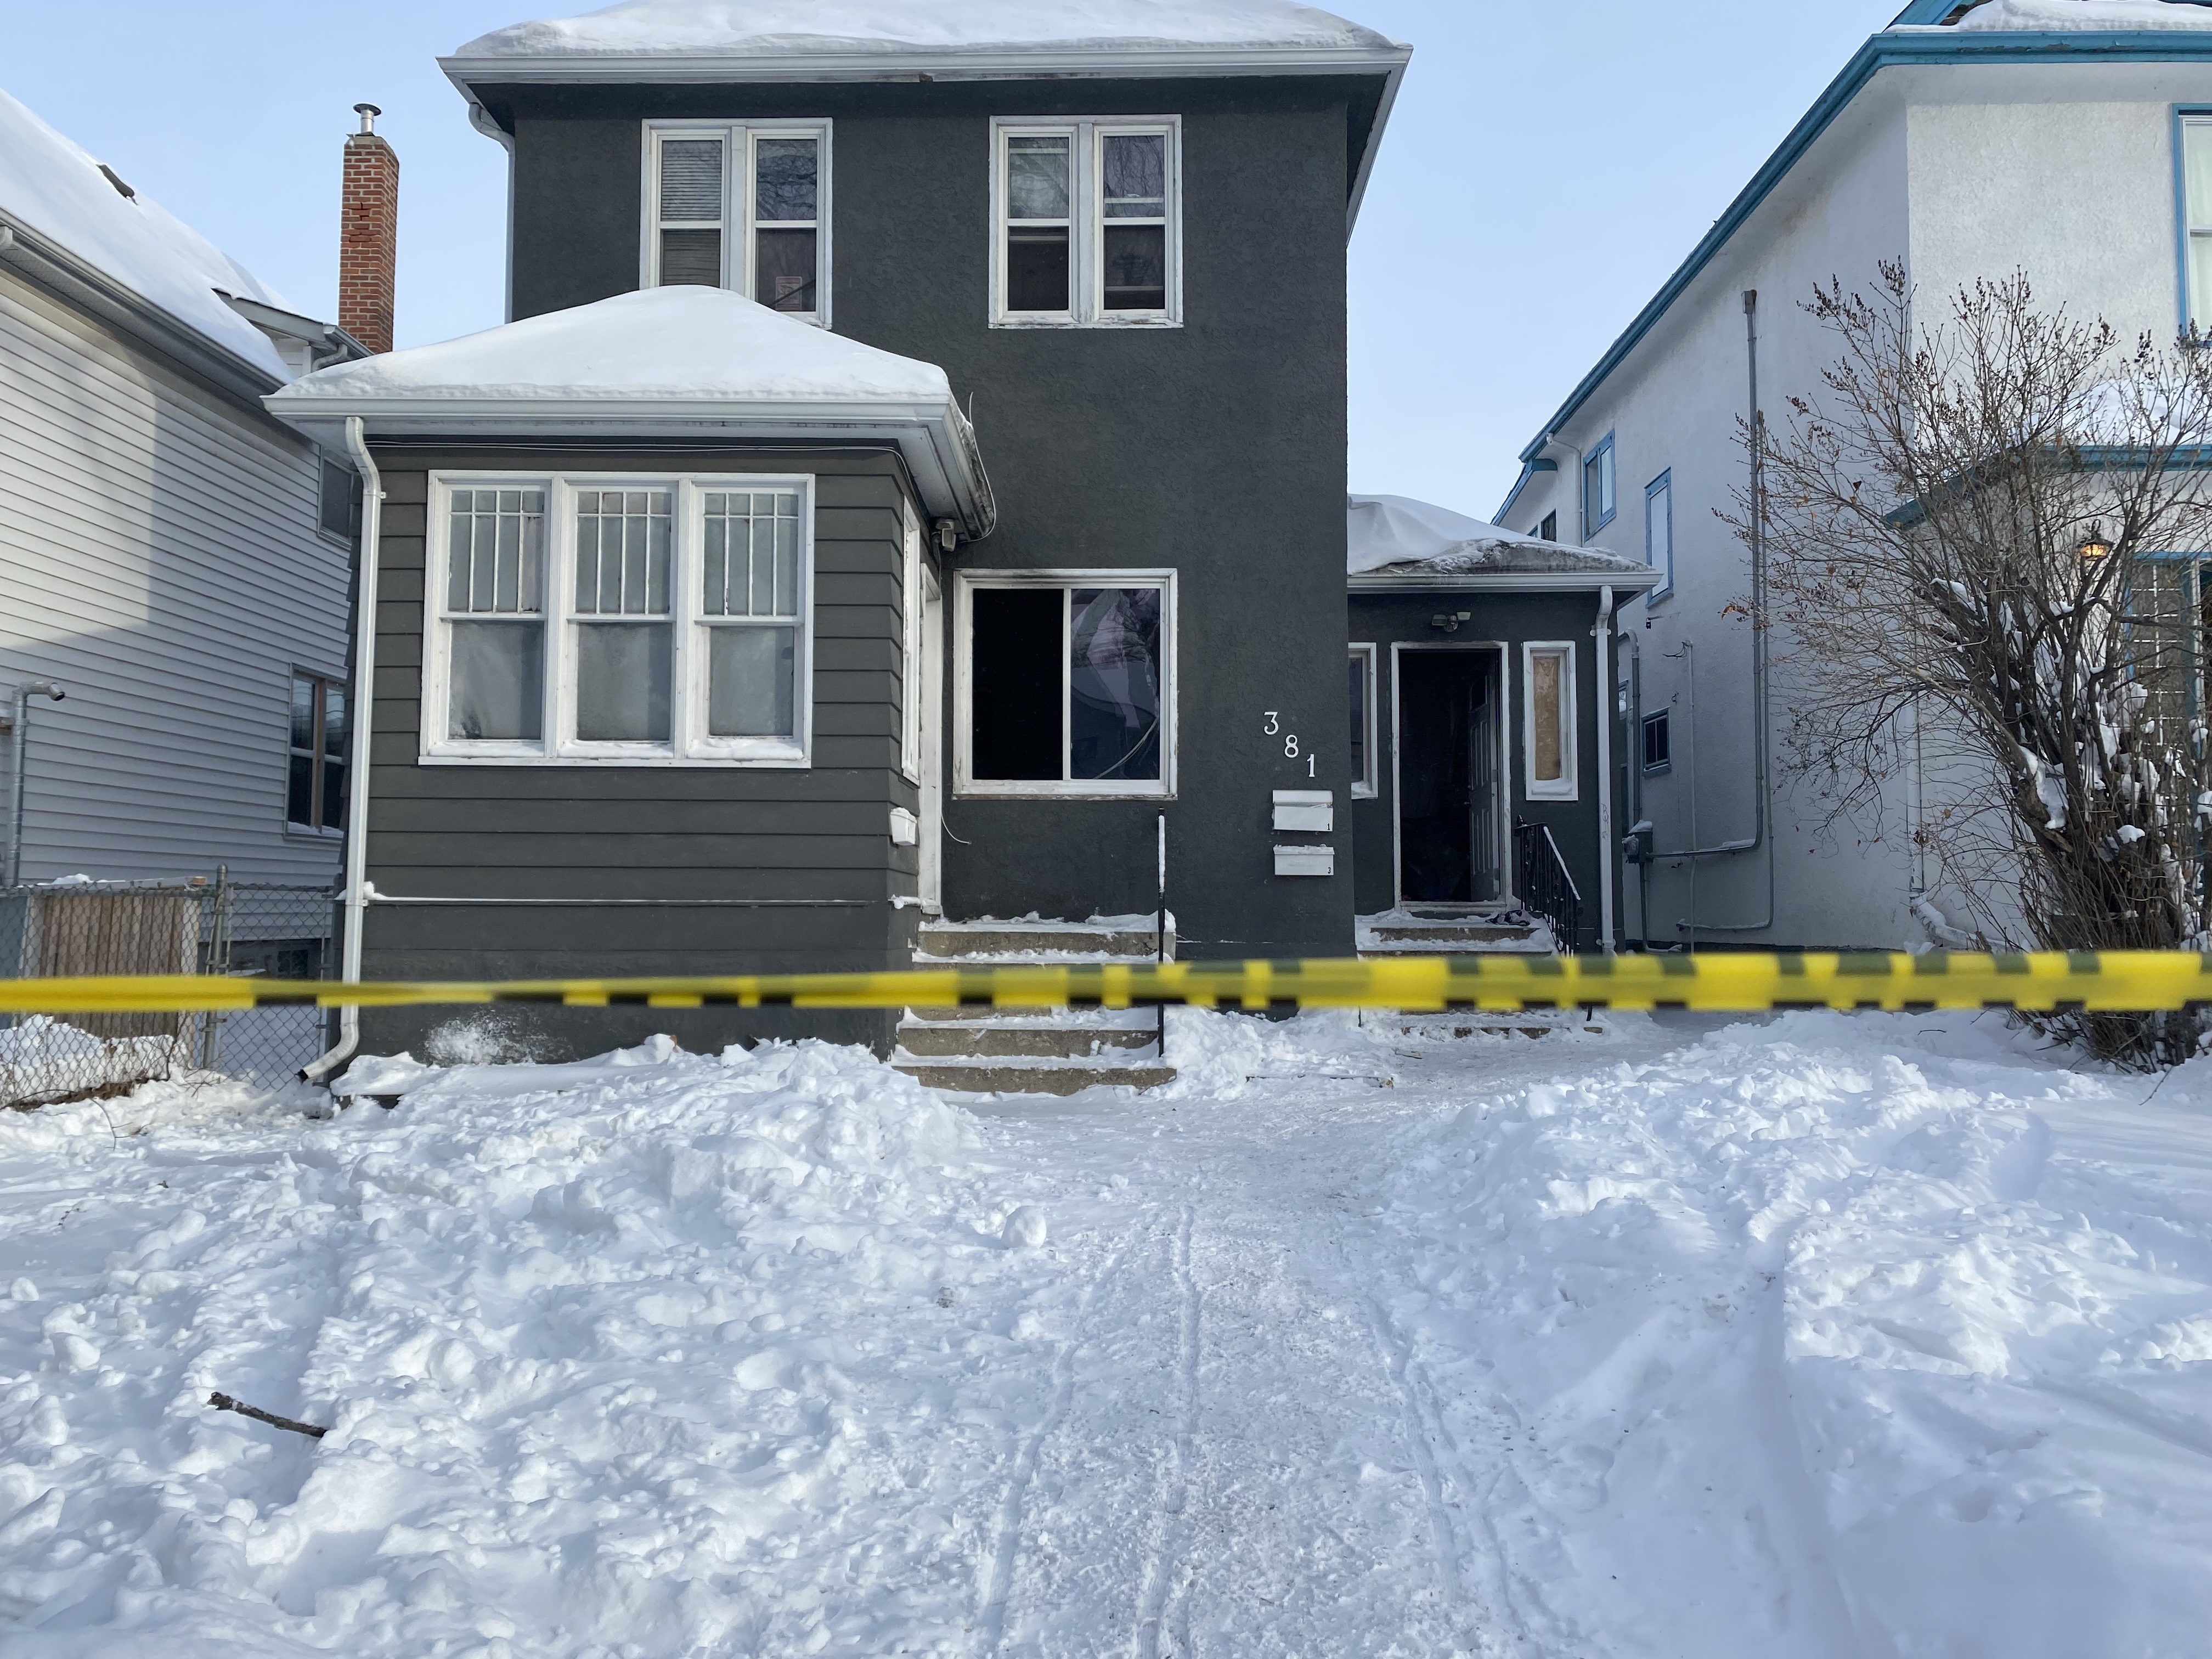 Aftermath of deadly Winnipeg fire all too common, says local association